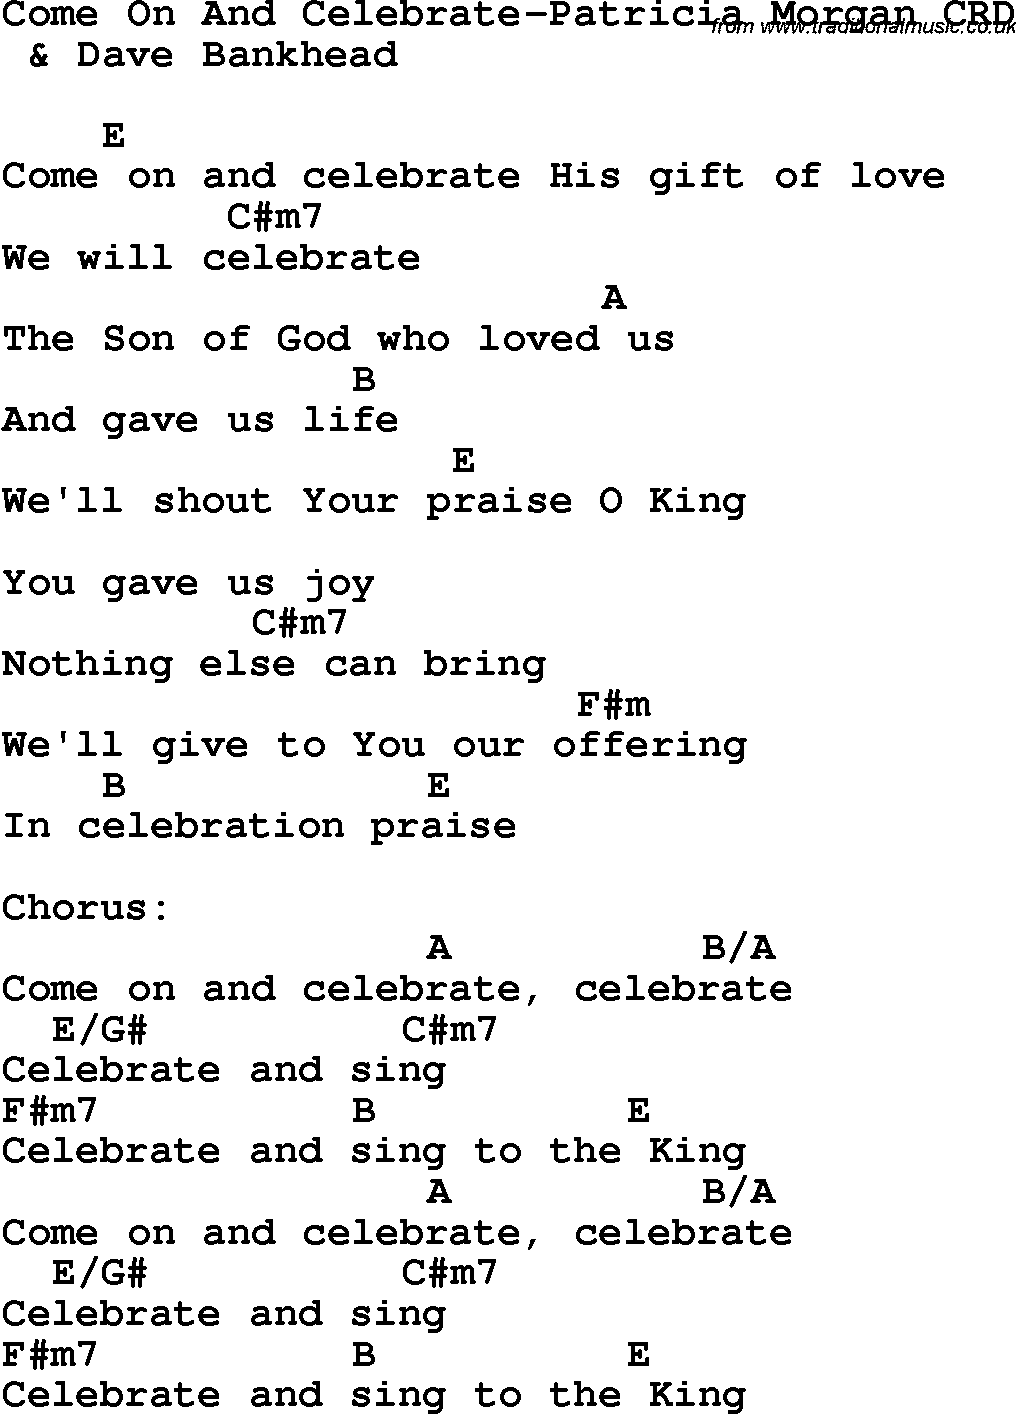 Christian Chlidrens Song Come On And Celebrate-Patricia Morgan CRD Lyrics & Chords